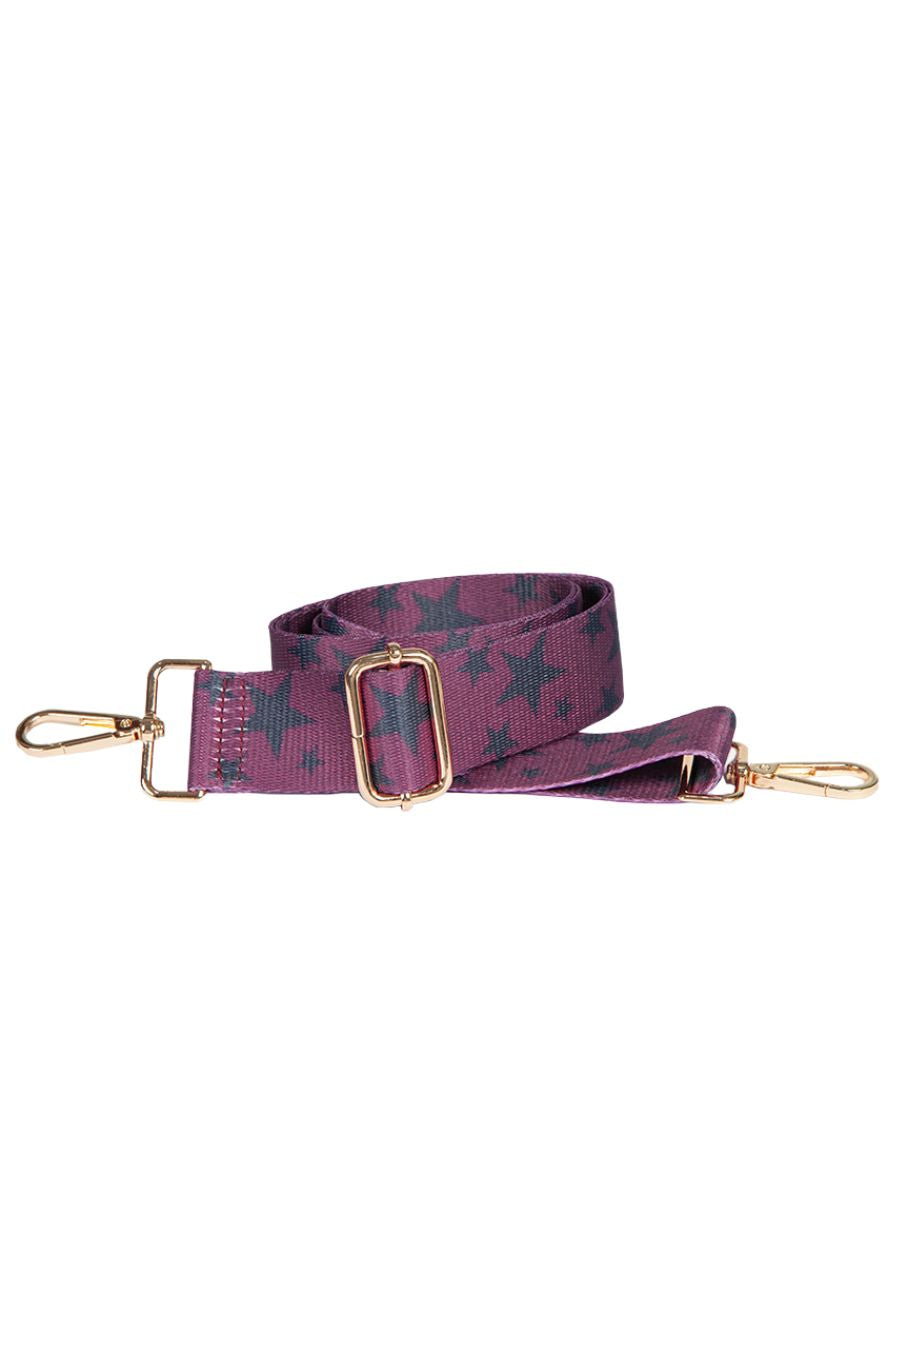 pink and black star print bag strap with gold hardware